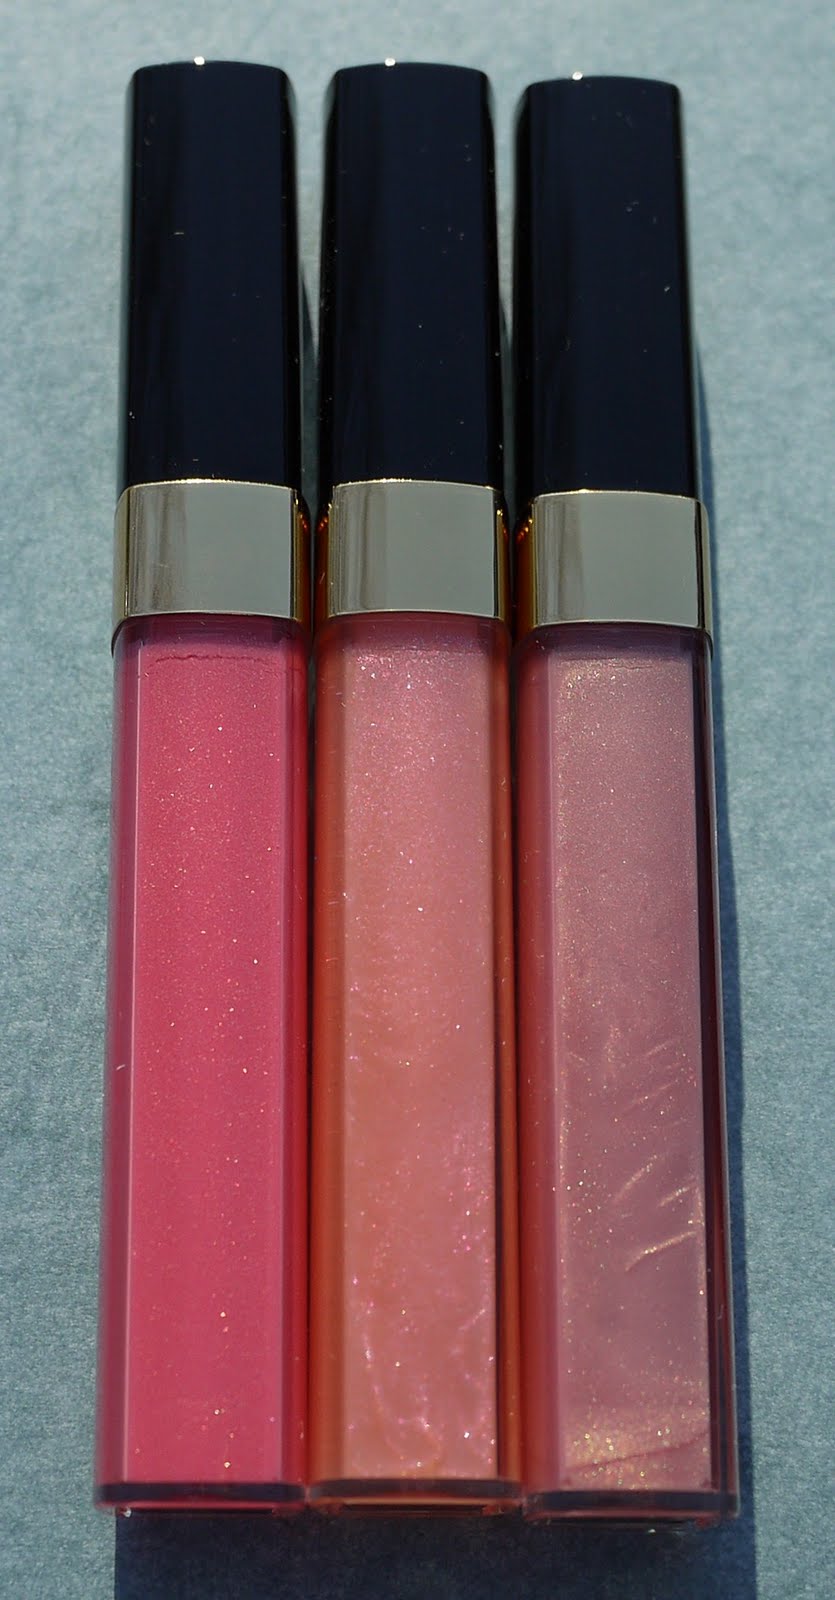 Things Beauty: Chanel Lèvres - Harmonie de Printemps Collection for Spring 2012